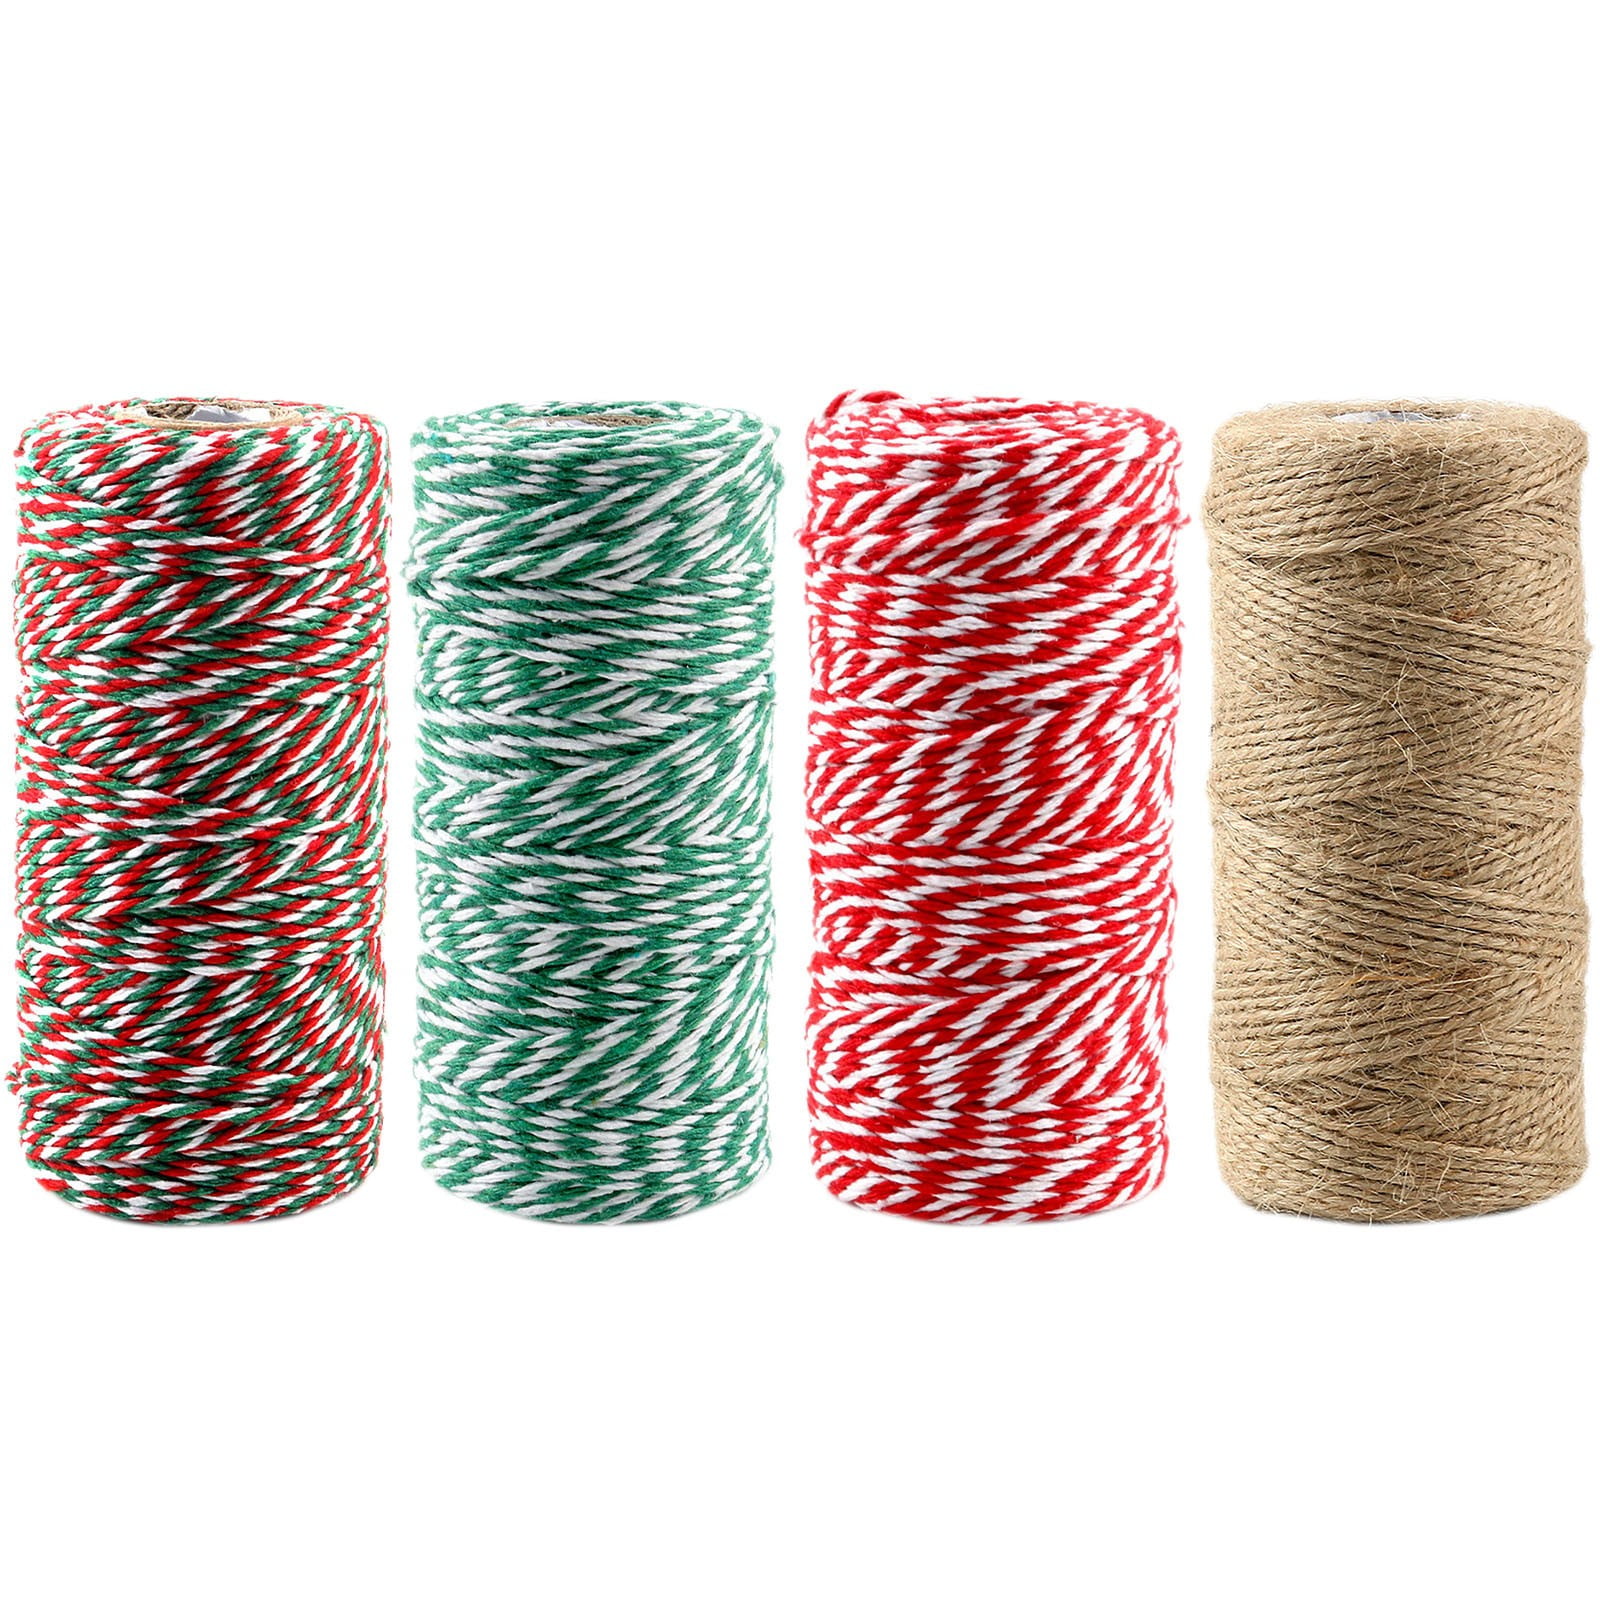 BambooMN 225 Yard, 2mm Crafty Jute Twine Thread Cord String for Artworks, DIY Crafts, Gift Wrapping, Picture Display and Gardening, 3 Balls Natural